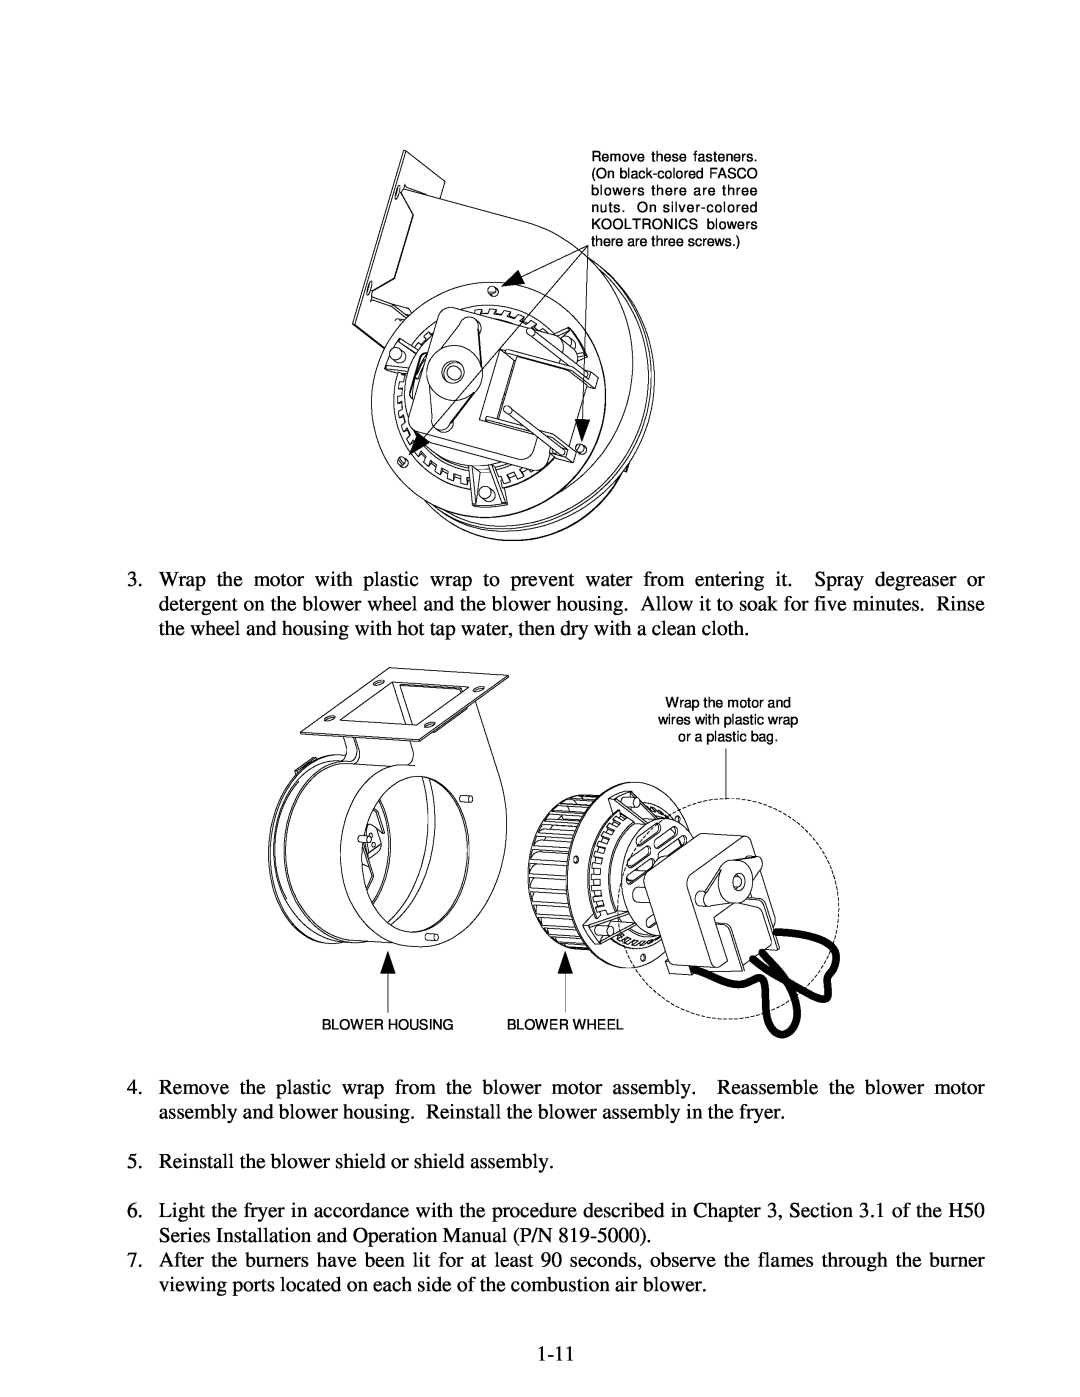 Frymaster H50 Series manual Reinstall the blower shield or shield assembly 